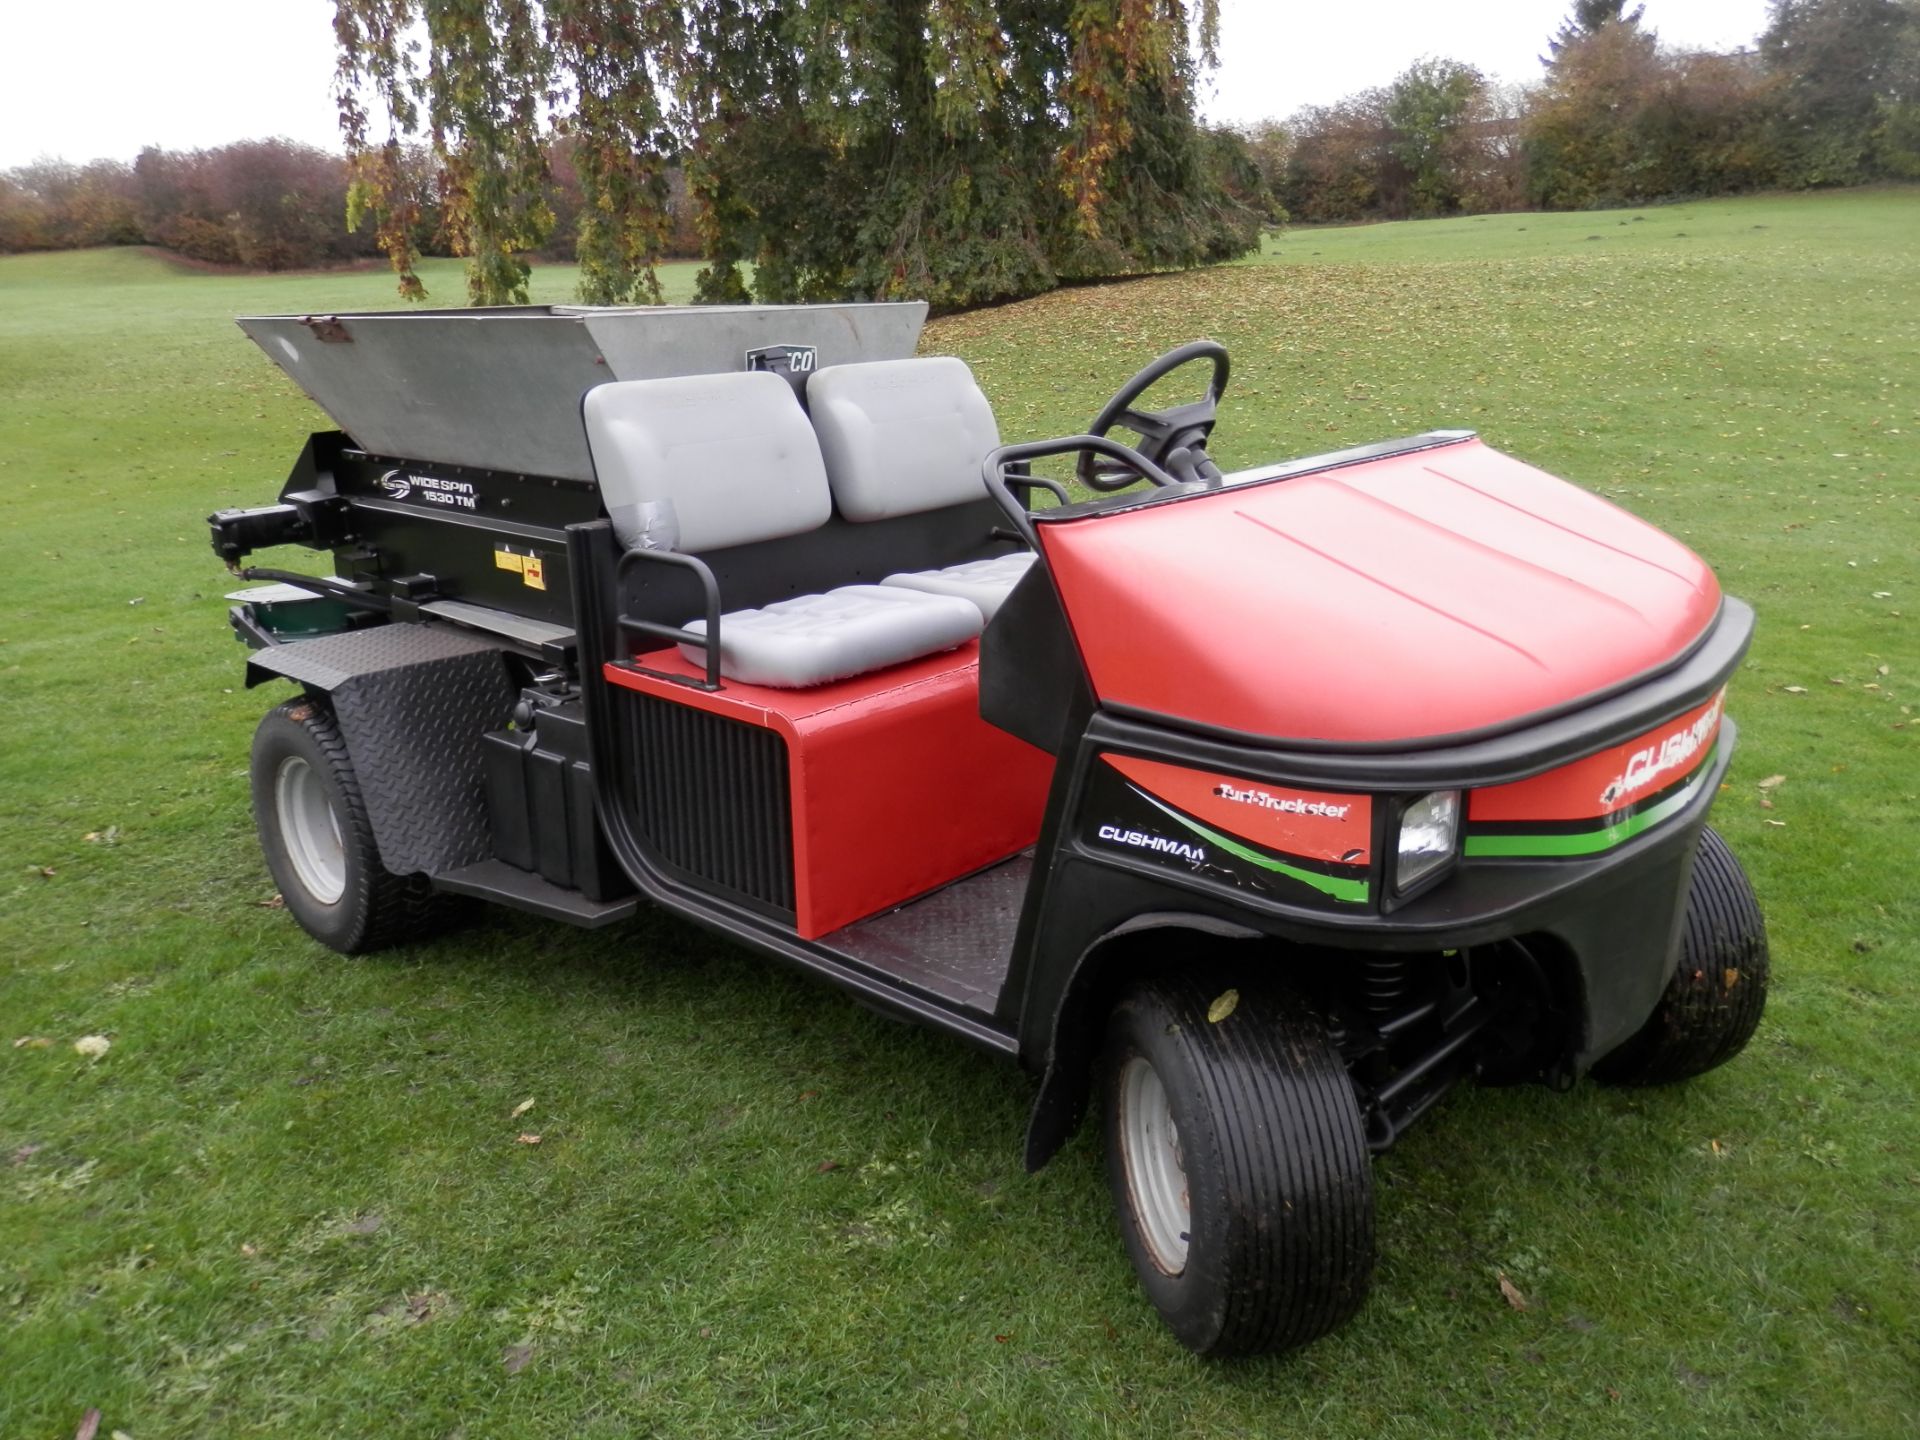 CUSHMAN TURF TRUCKSTER SPREADER WITH WIDESPIN 1530 REAR. GREAT WORKING UNIT.